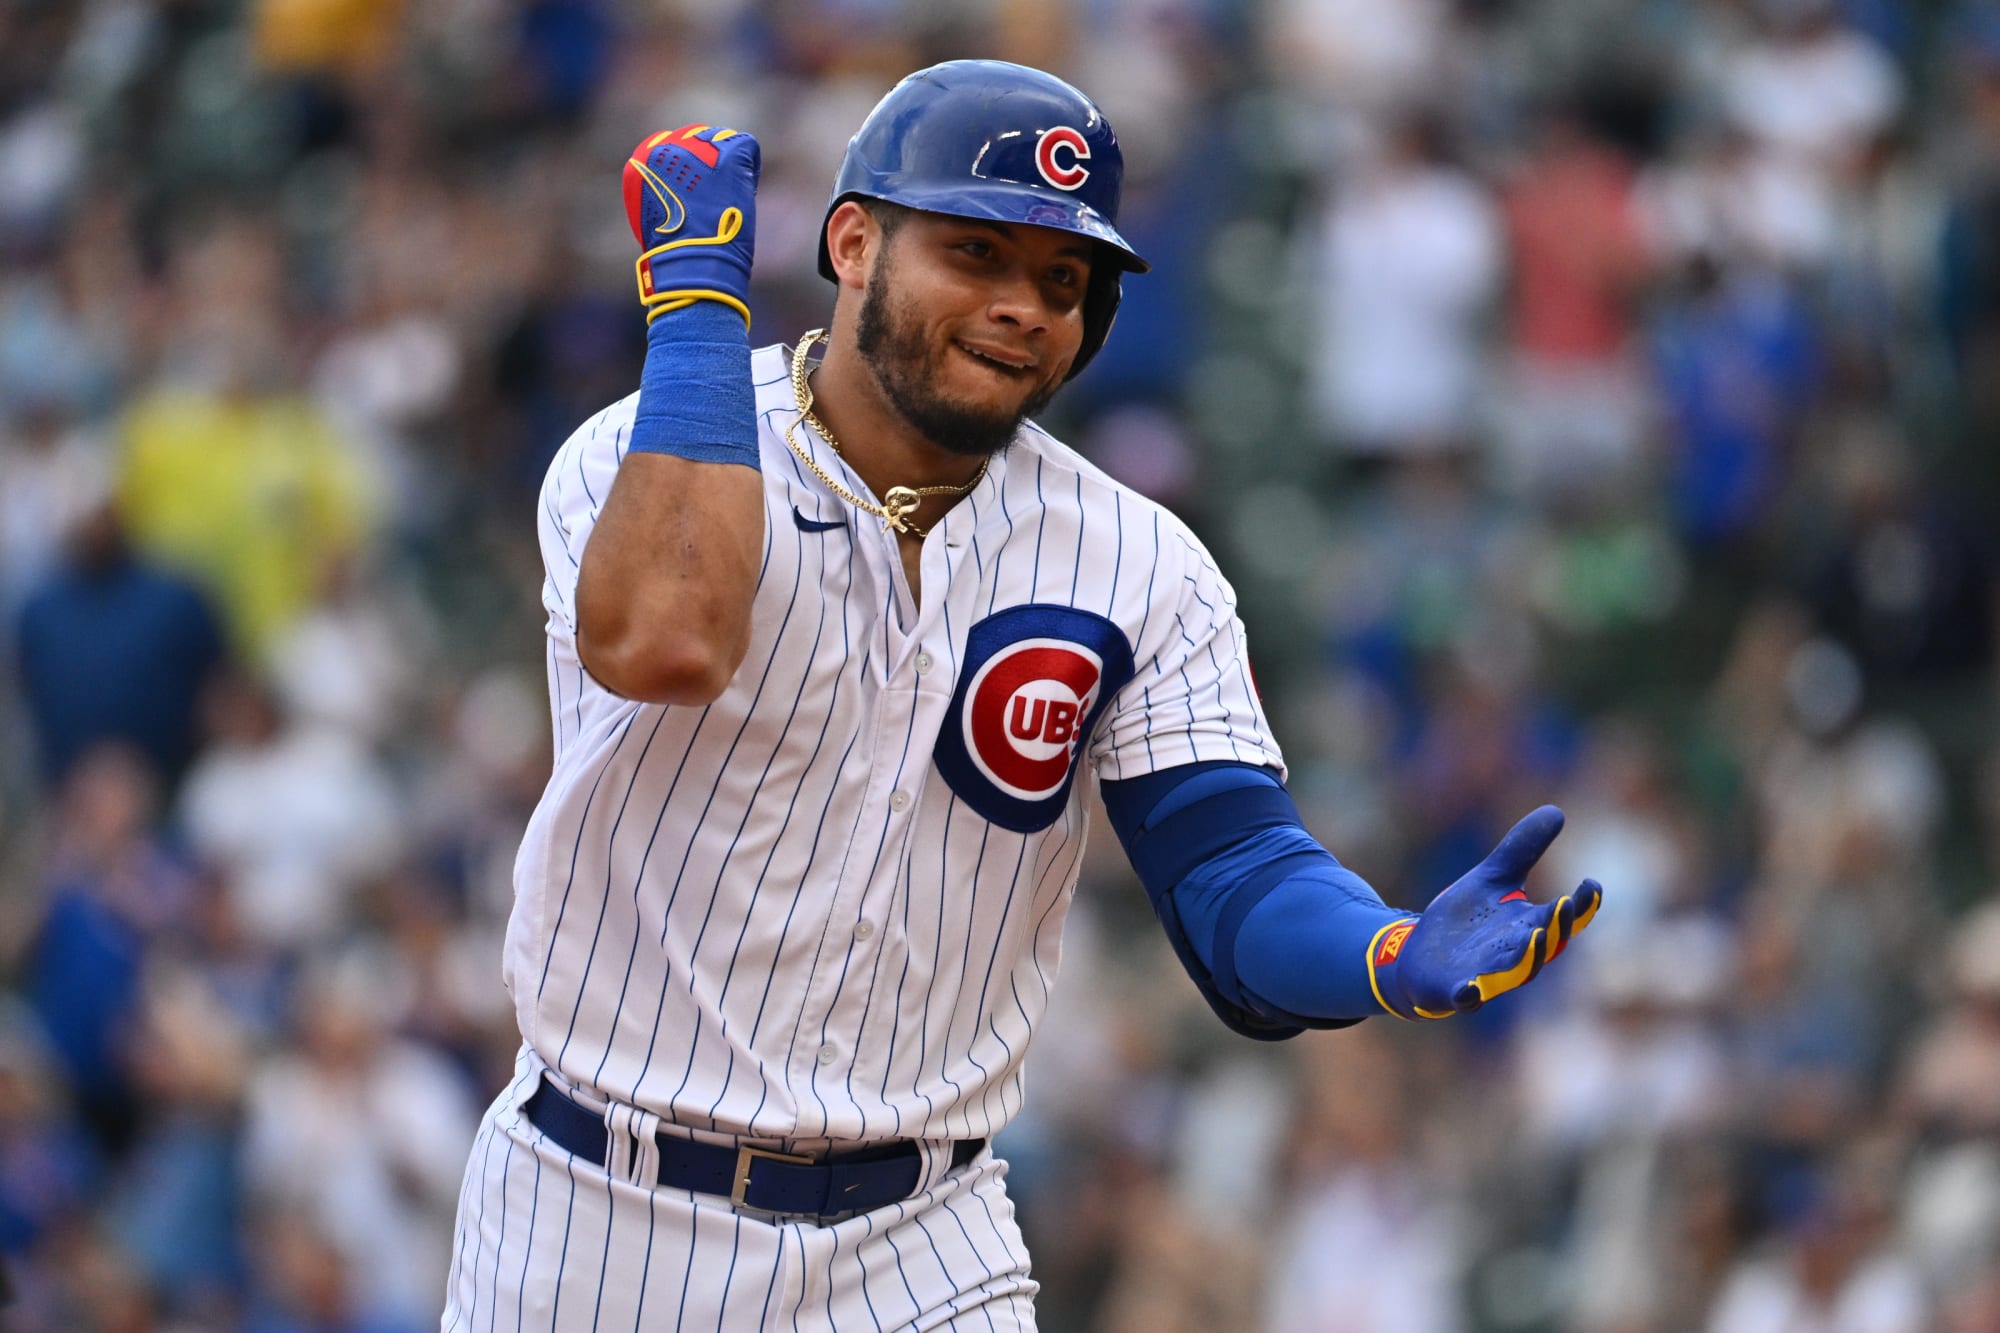 Contreras committed to catching again soon, thrives in return to